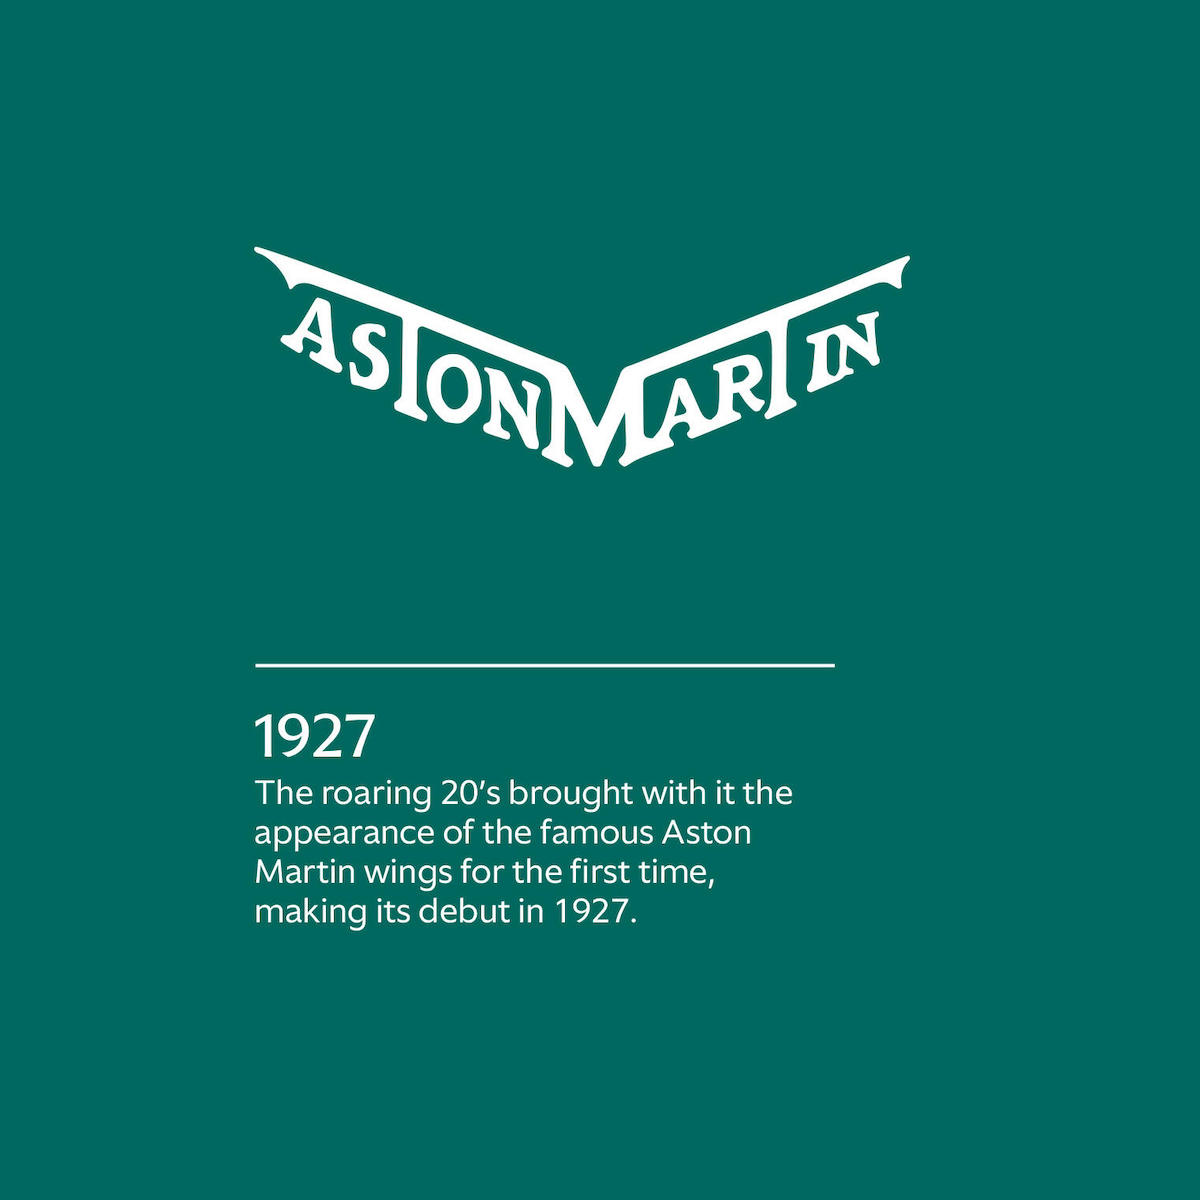 The 1927 version of the Aston Martin wings logo